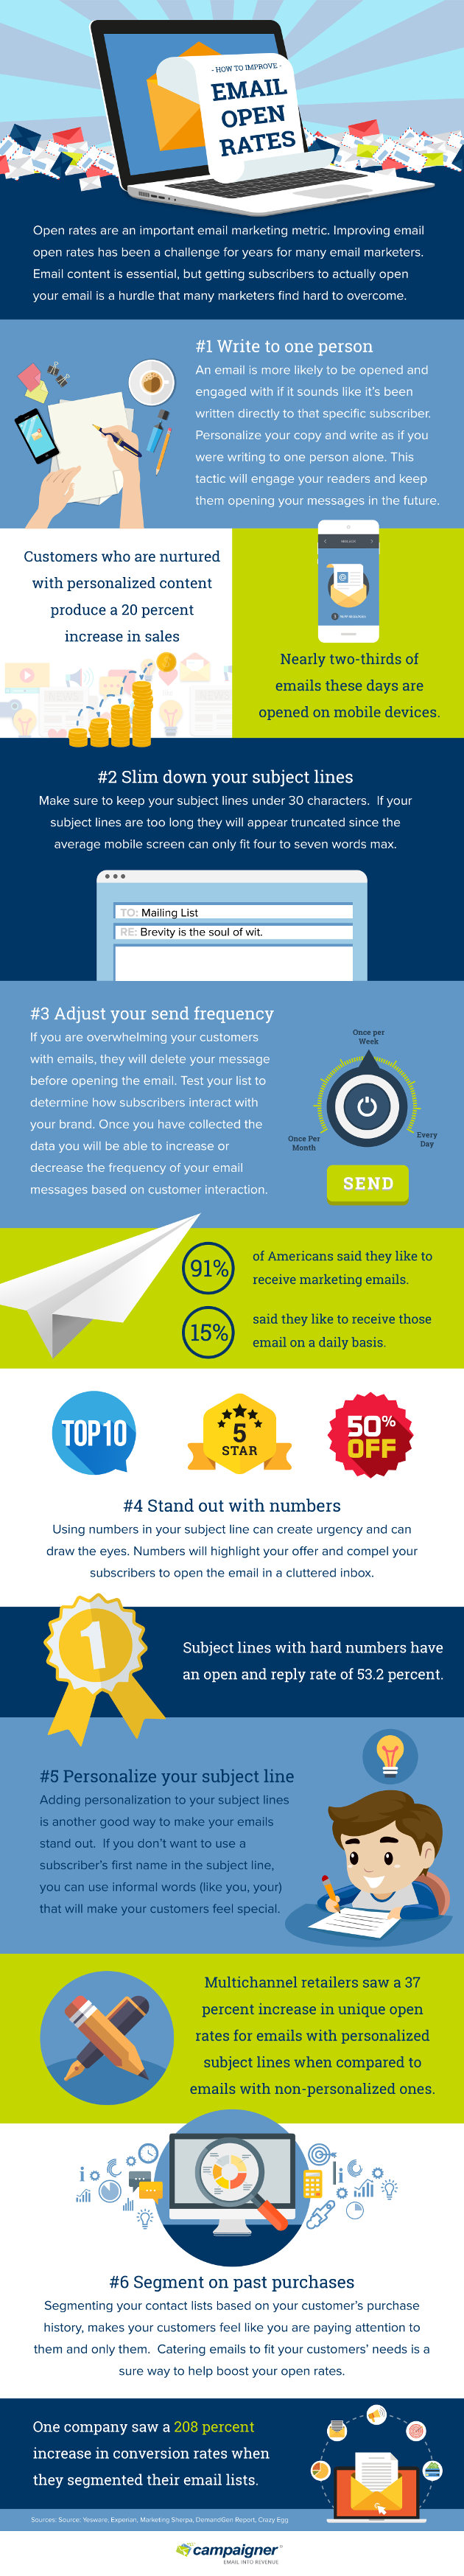 Infographic How to Improve Email Open Rates